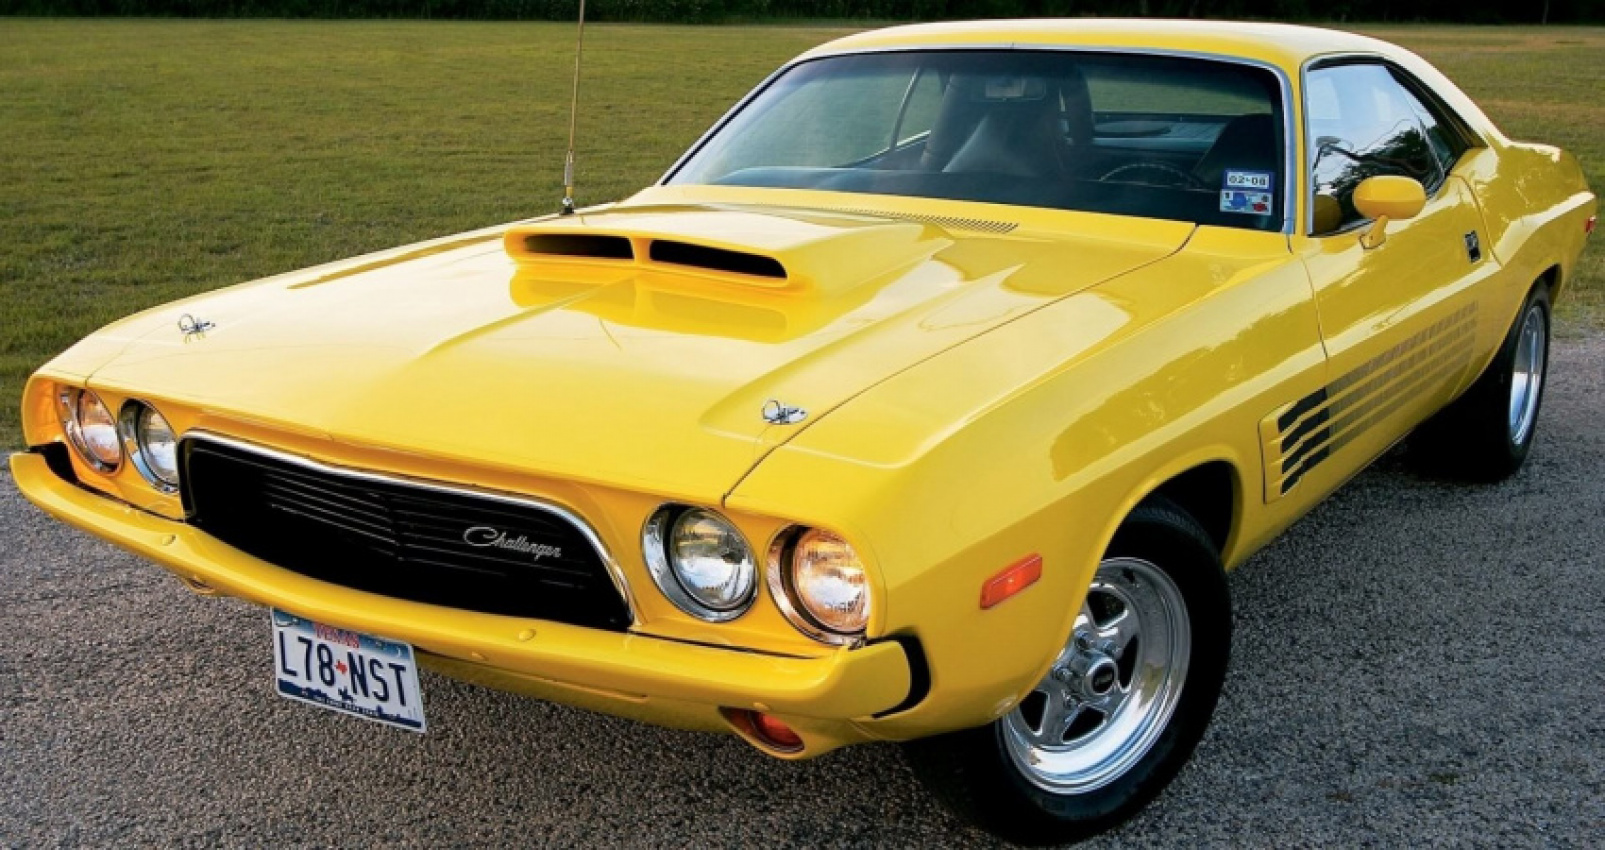 autos, cars, classic cars, dodge, 1973 dodge challenger photos, 1973 dodge challenger wallpapers, 1973 dodge challenger wallpapers